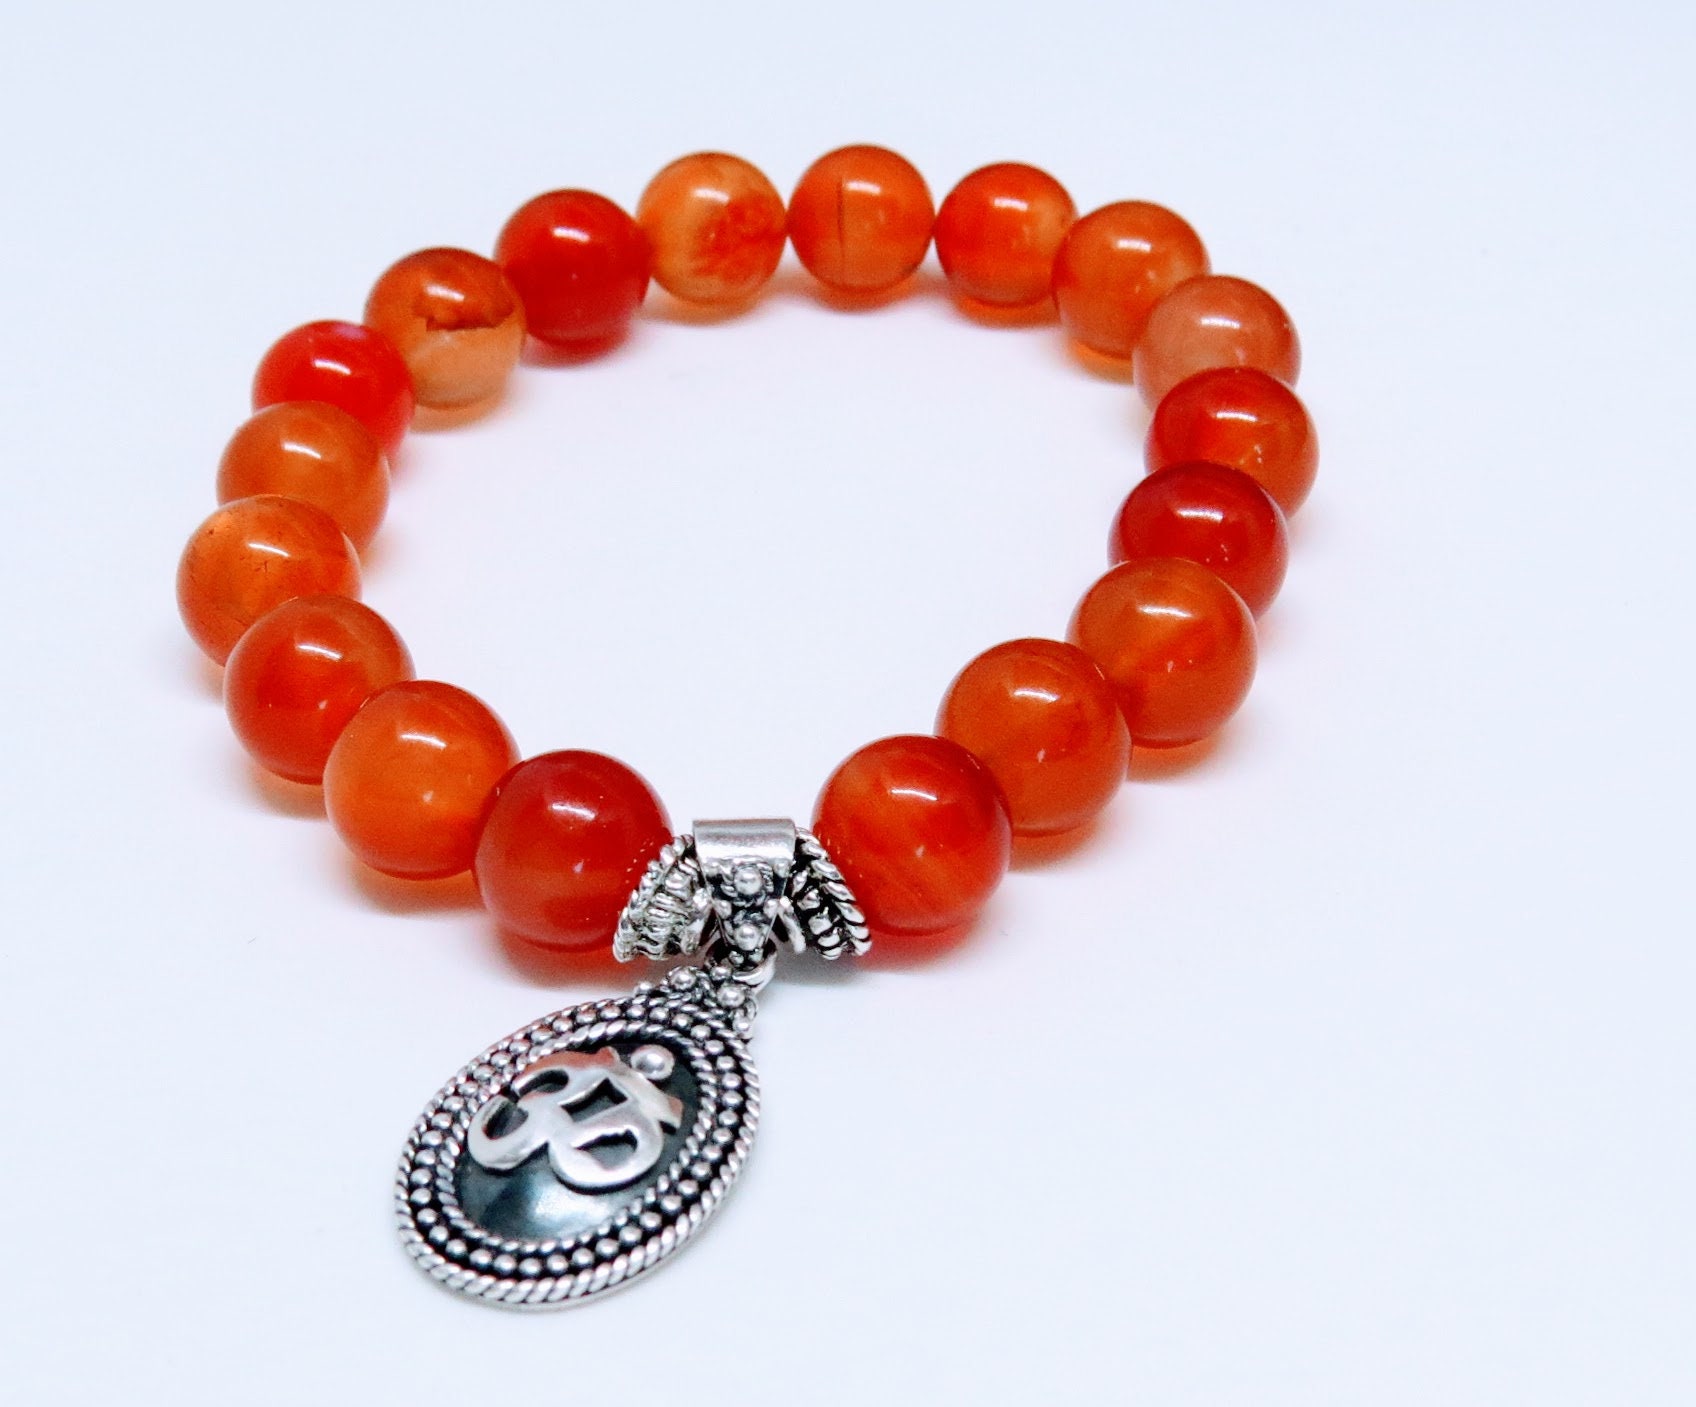 Details about   Agate bracelet with amber and cross,Bracelet,Amber,Agate,Sterling silver cross,